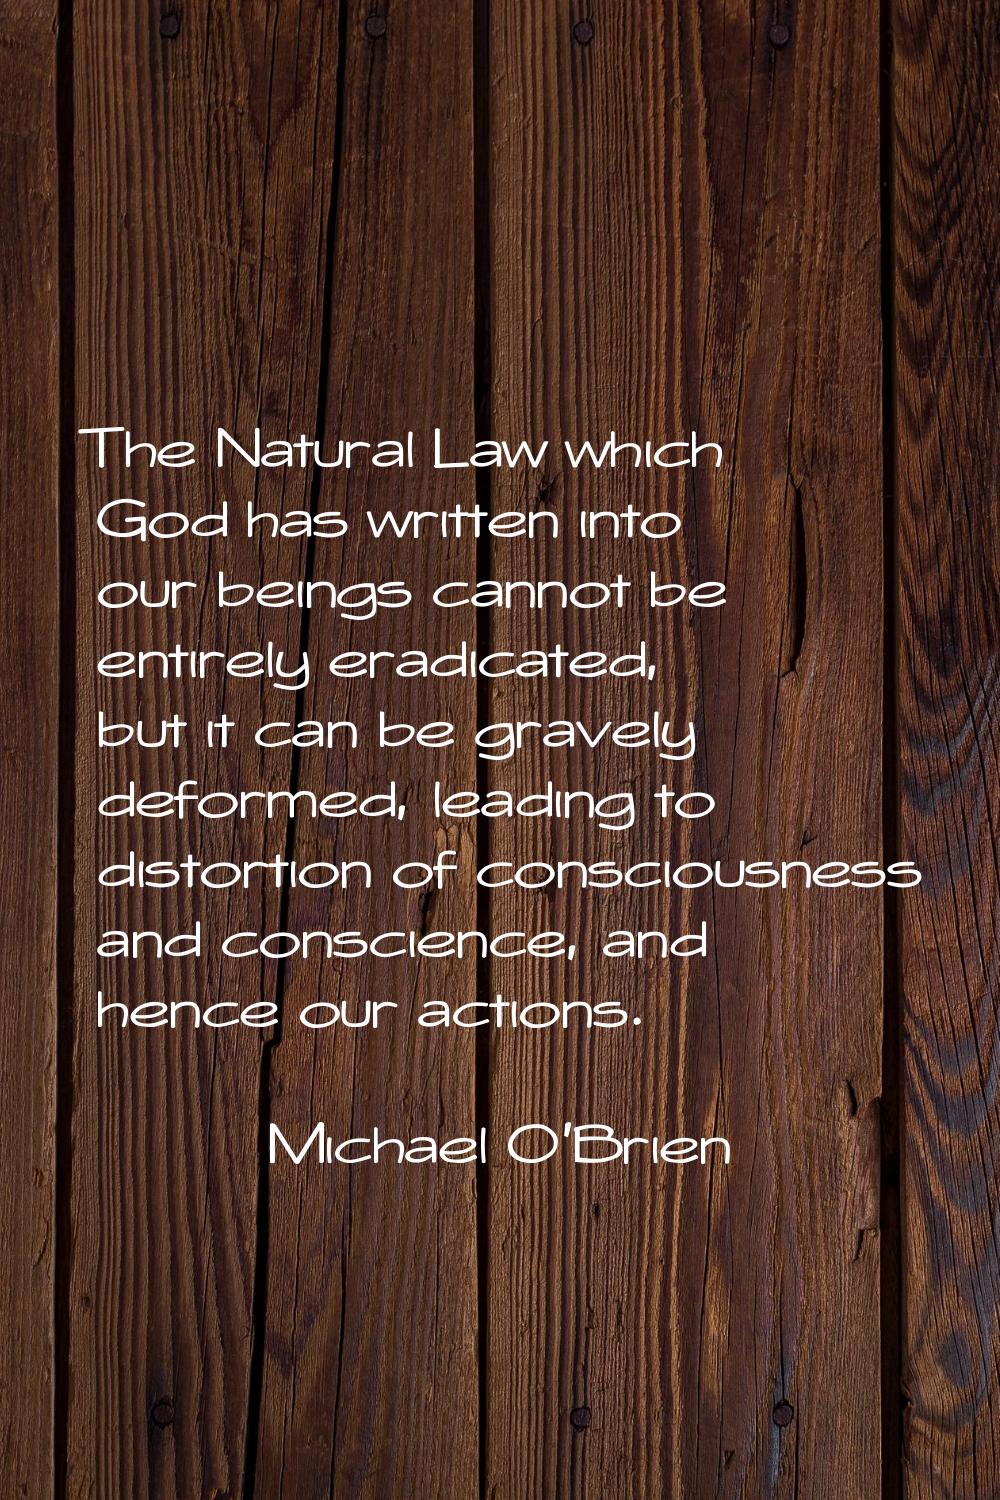 The Natural Law which God has written into our beings cannot be entirely eradicated, but it can be 